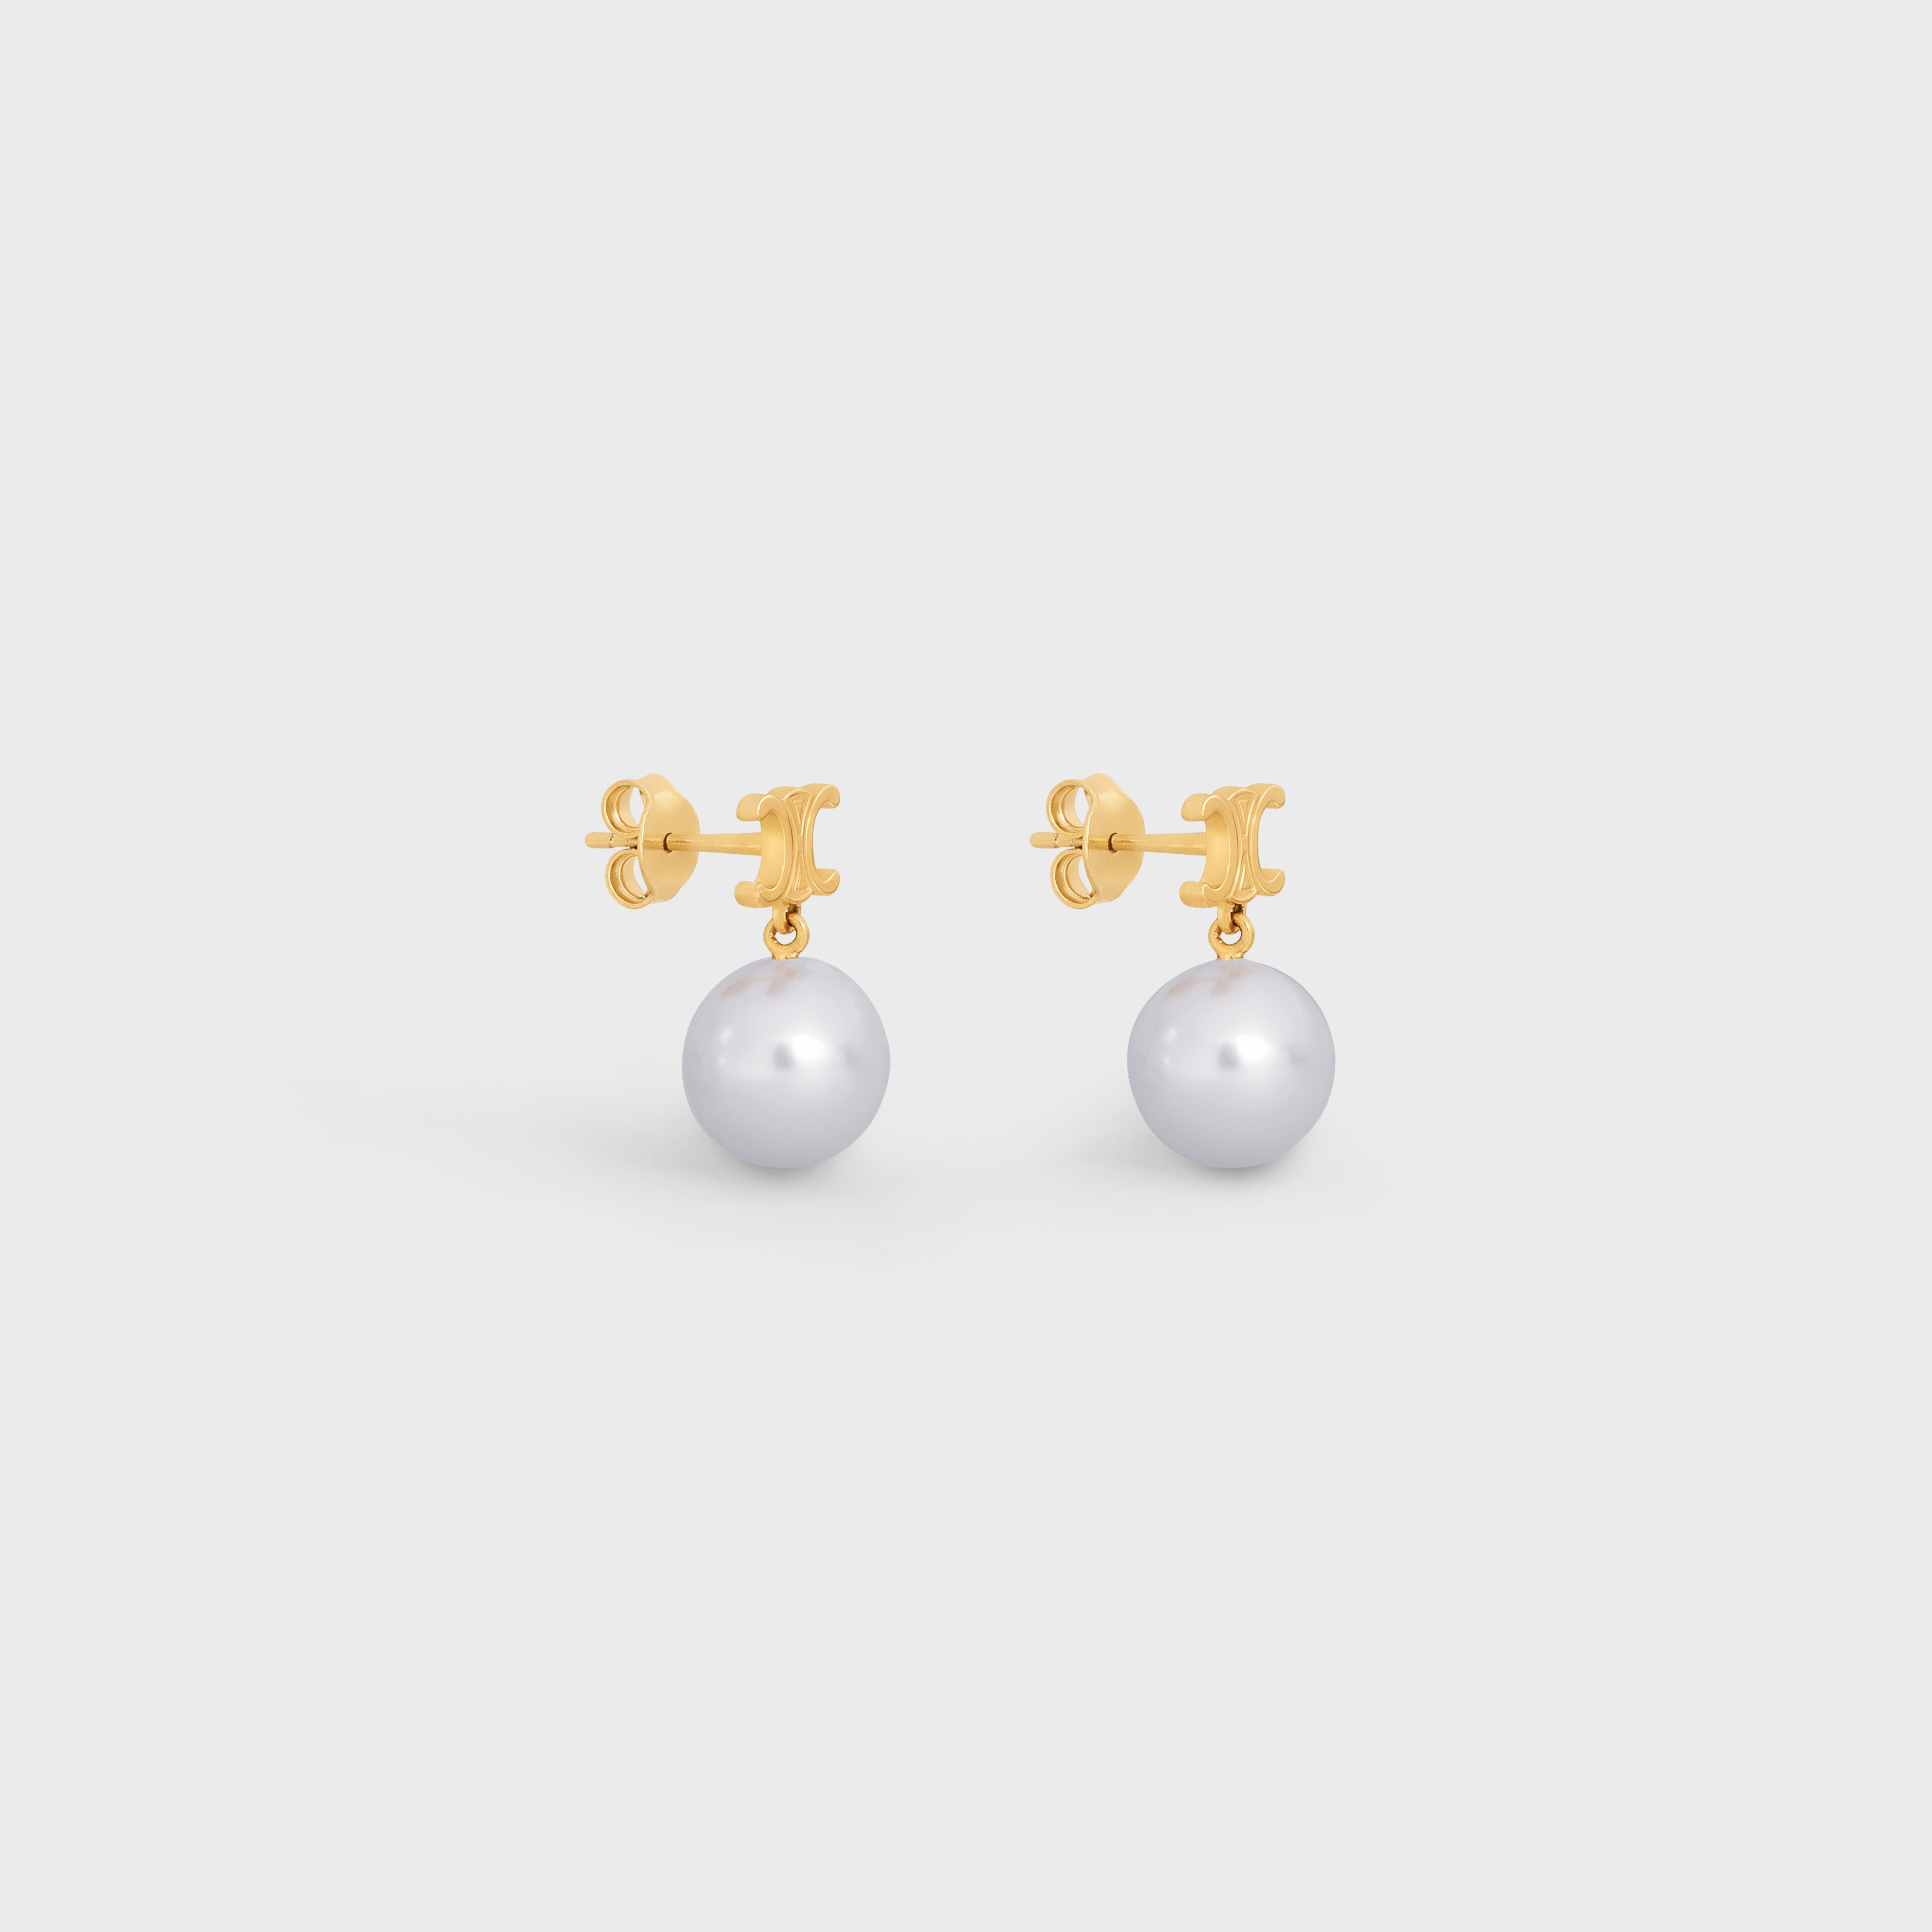 Triomphe Pearl Earrings in Brass with Gold Finish and Glass Pearls - 2